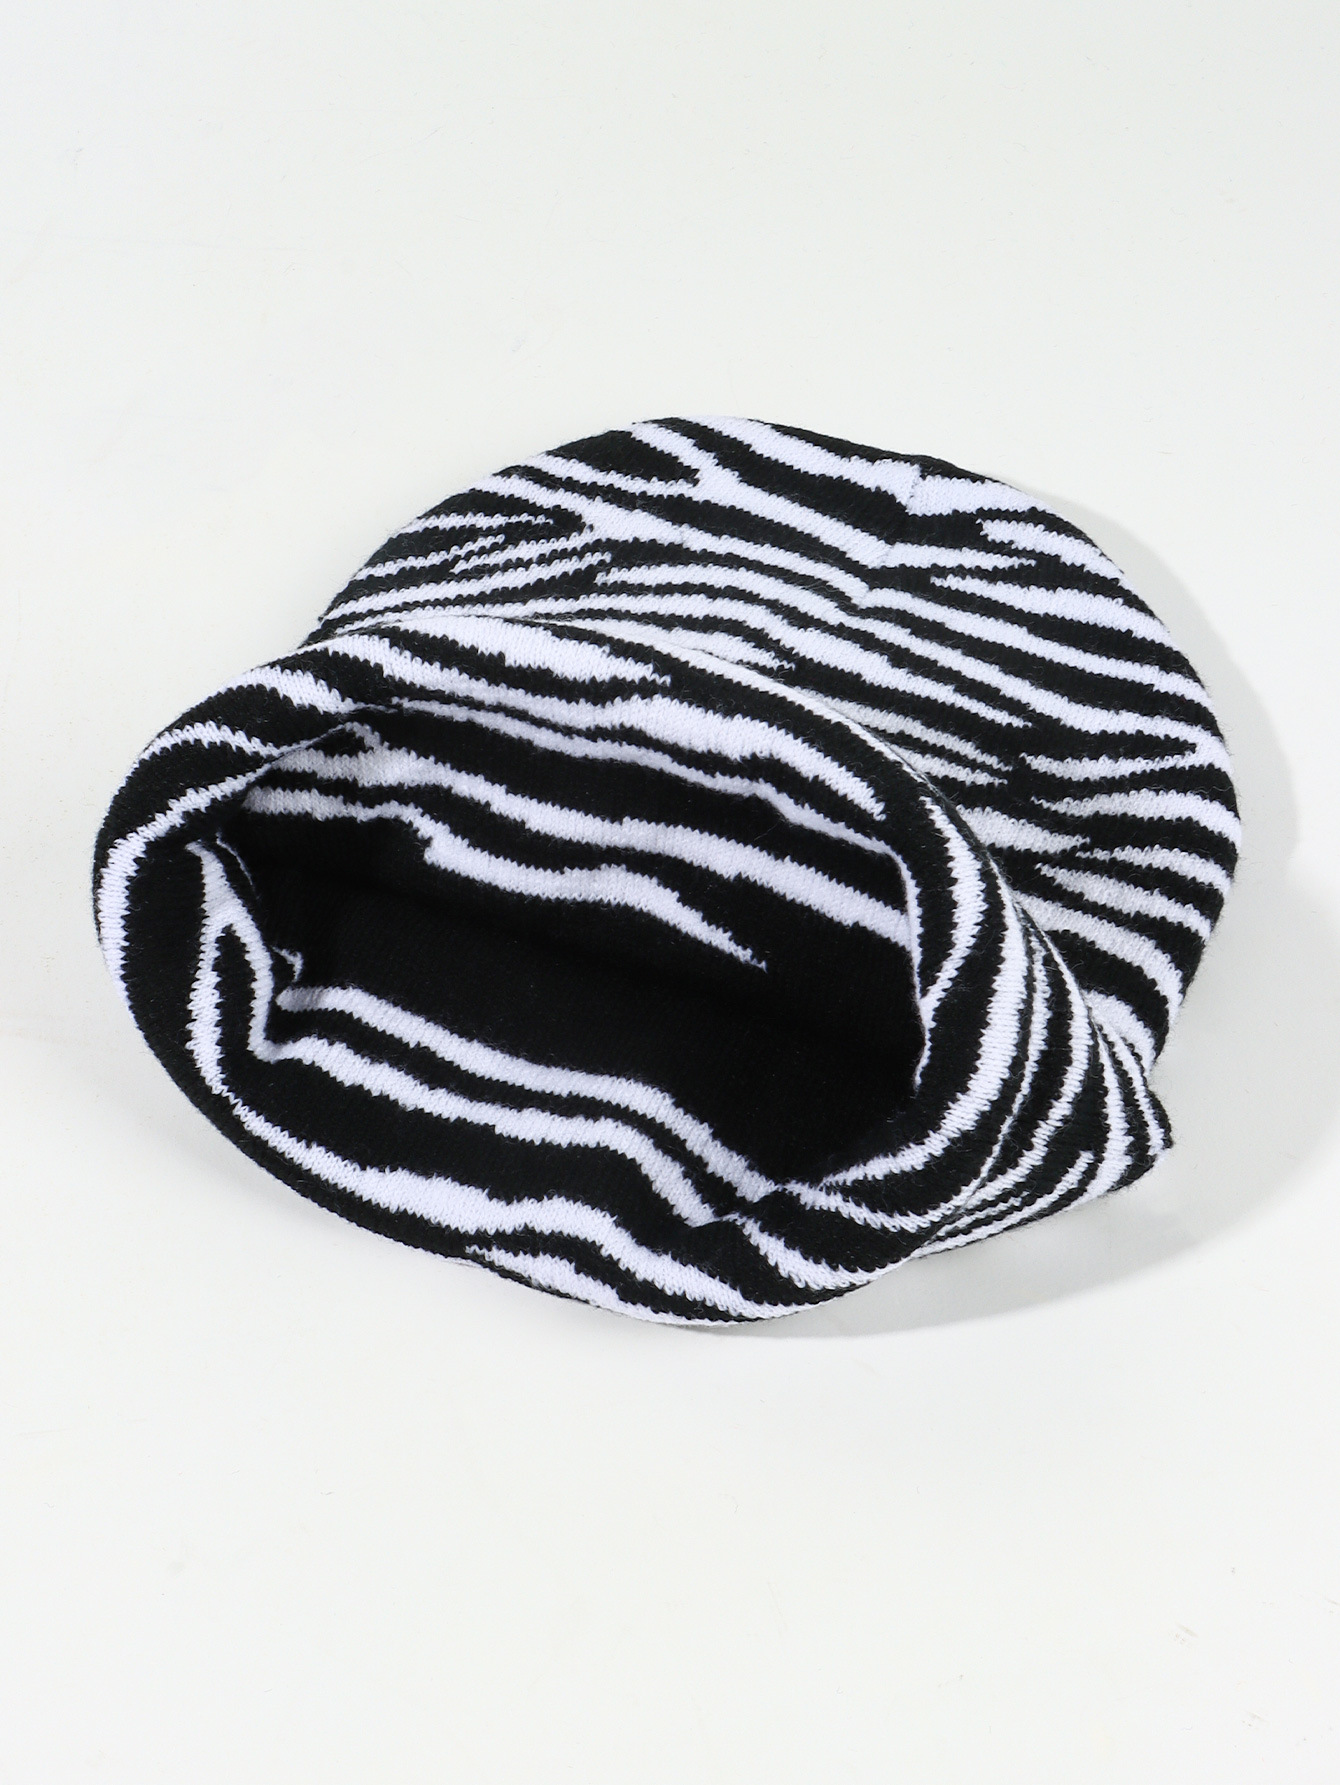 Cross-Border Amazon Shein Exclusive Spot Jacquard Knitted Hat European and American Fashion Zebra Pattern Black and White Warm Hat for Women